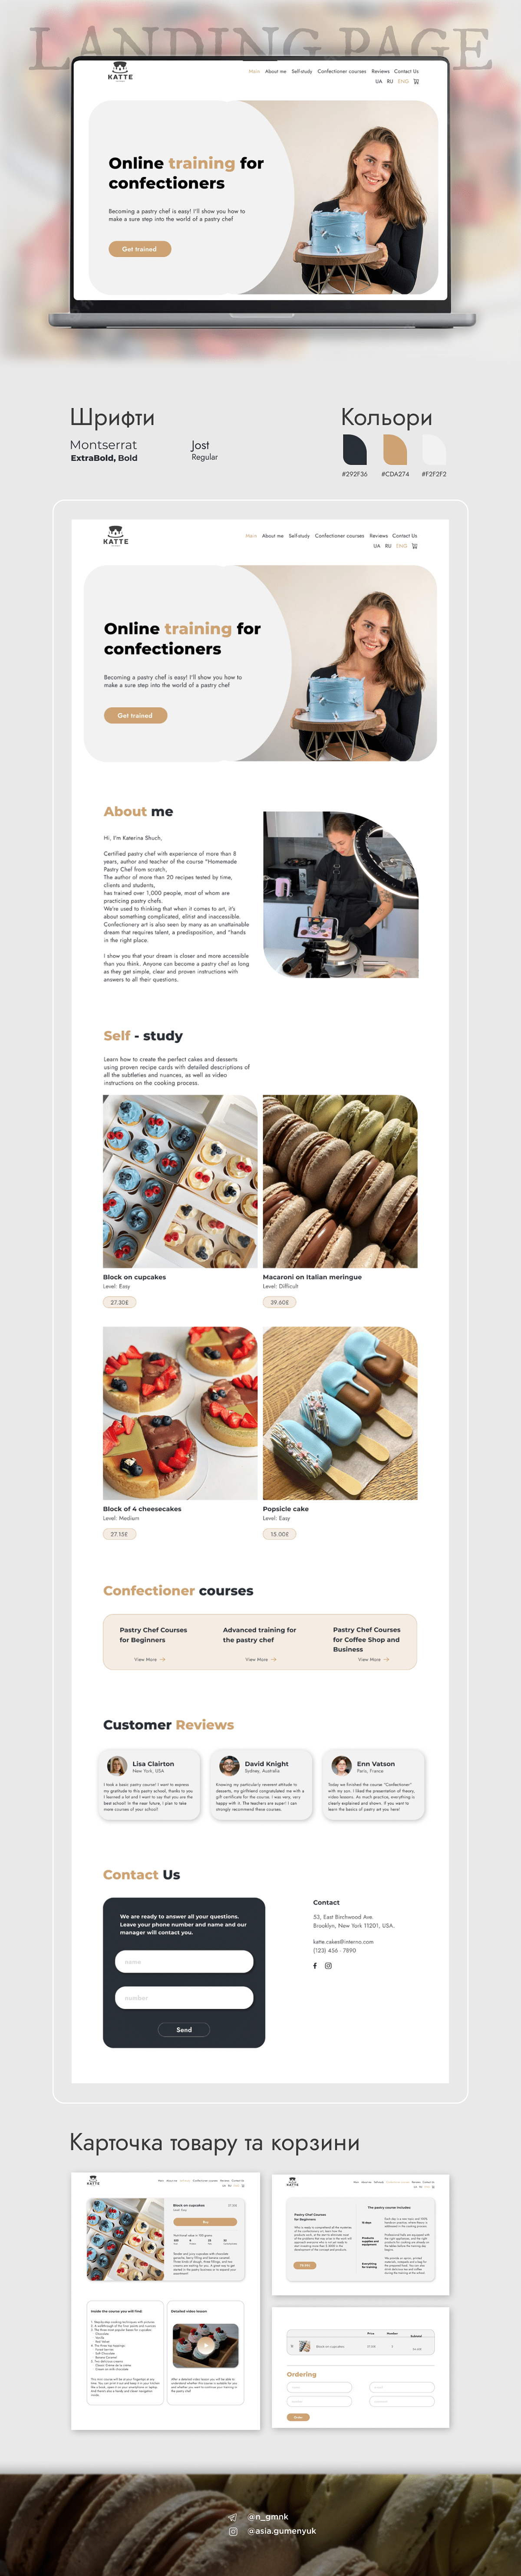 Candy shop design Figma landing page store website ui design UI/UX Web Design  Website Website Design